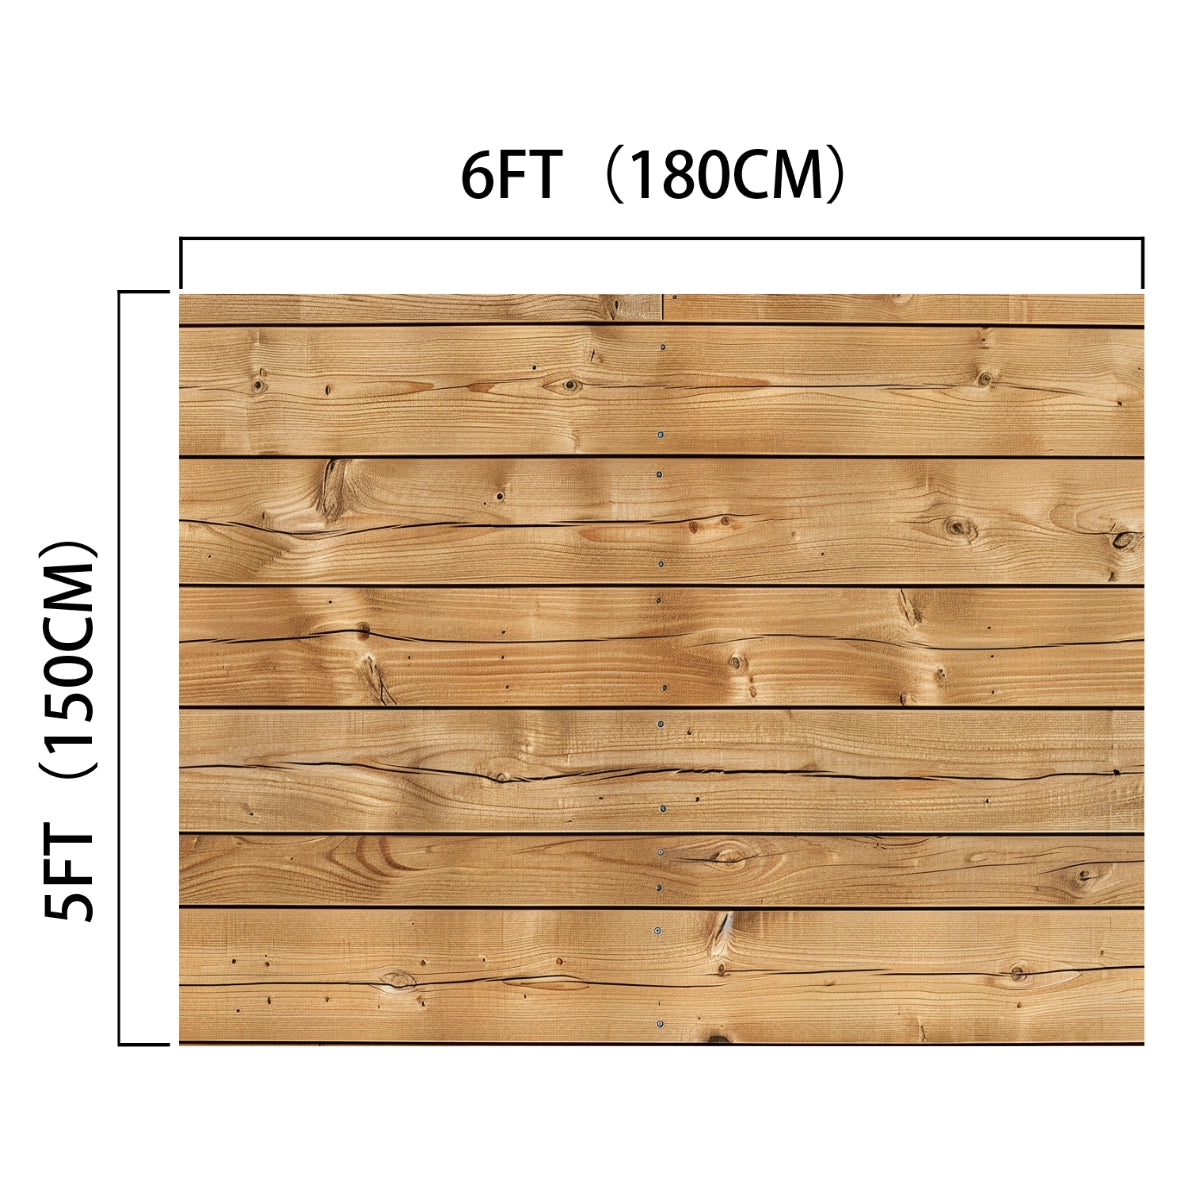 The 7x5ft Retro Wood Graduate Wall Background Wooden Backdrop Studio Props for Baby Shower Birthday Photography by ideasbackdrop measures 6 feet (180 cm) horizontally and 5 feet (150 cm) vertically. The panel consists of horizontal wooden planks, ideal for use as a wood wall backdrop.